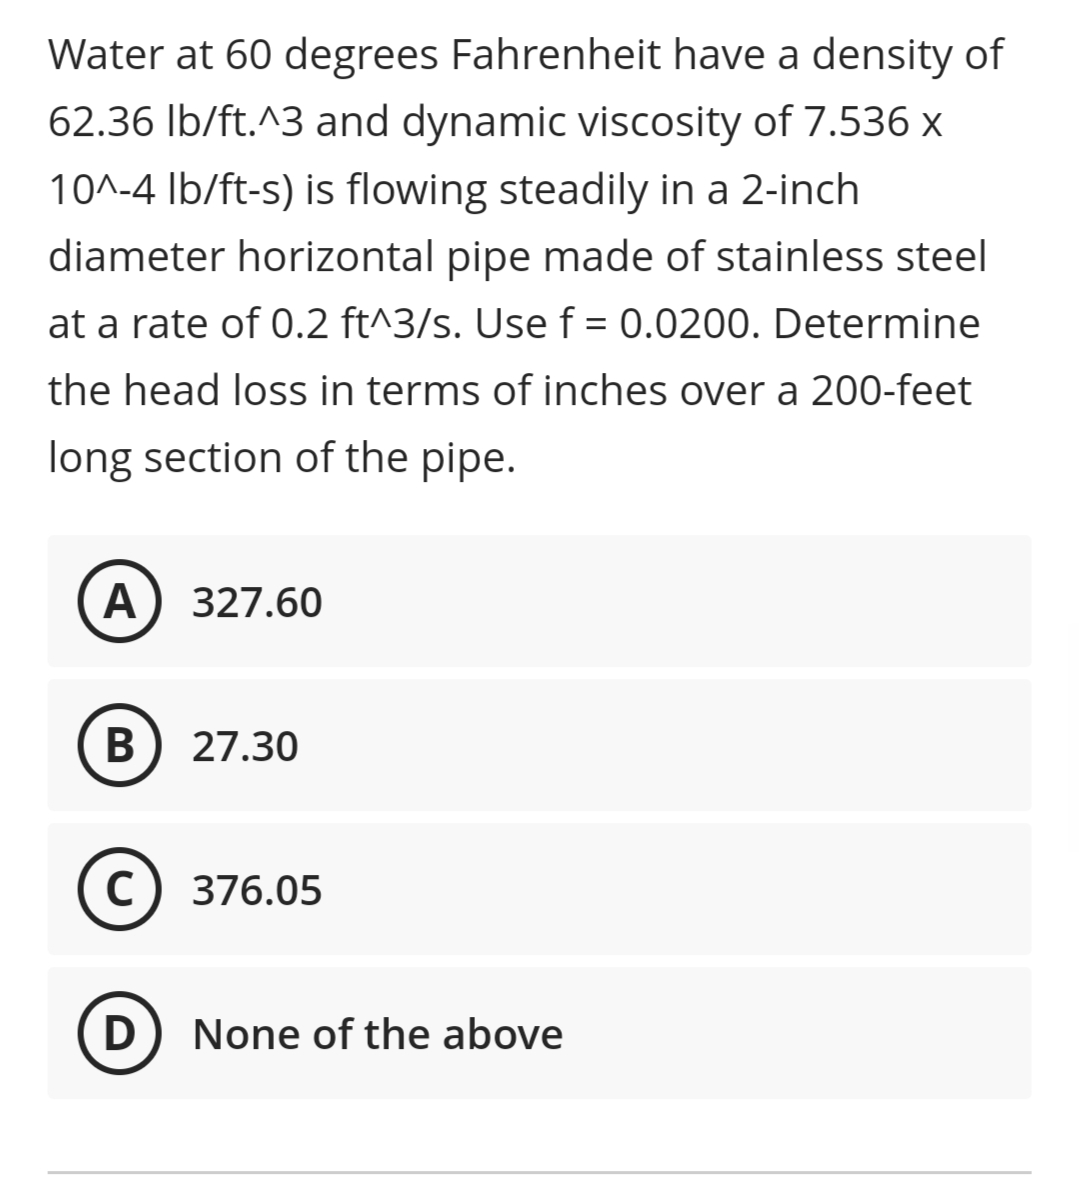 Water at 60 degrees Fahrenheit have a density of
62.36 Ib/ft.^3 and dynamic viscosity of 7.536 x
10^-4 Ib/ft-s) is flowing steadily in a 2-inch
diameter horizontal pipe made of stainless steel
at a rate of 0.2 ft^3/s. Use f = 0.0200. Determine
%3D
the head loss in terms of inches over a 200-feet
long section of the pipe.
A) 327.60
В
27.30
C
376.05
D
None of the above
